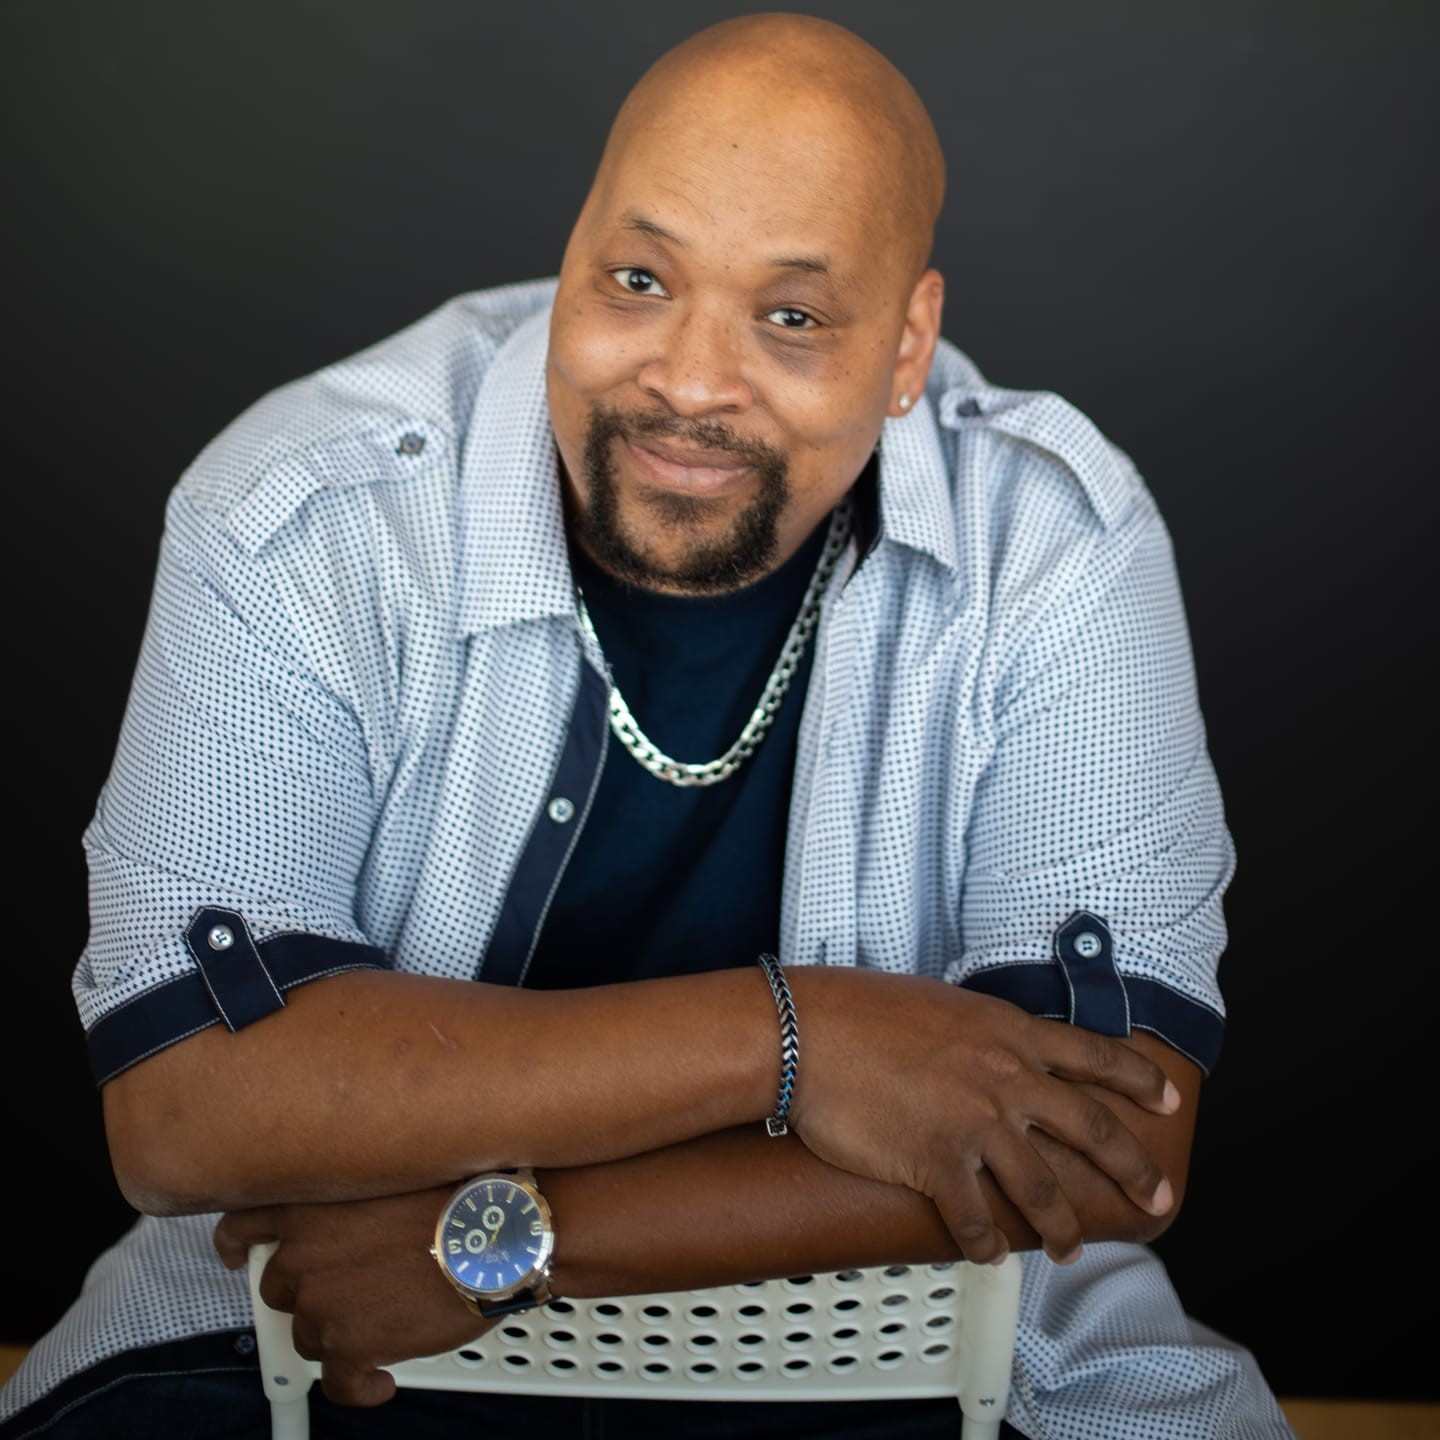 Milton Wyley 7:20 Show Funny Stop Comedy Club on May 28, 19:20@Funny Stop Comedy Club - Buy tickets and Get information on Funny Stop funnystop.online